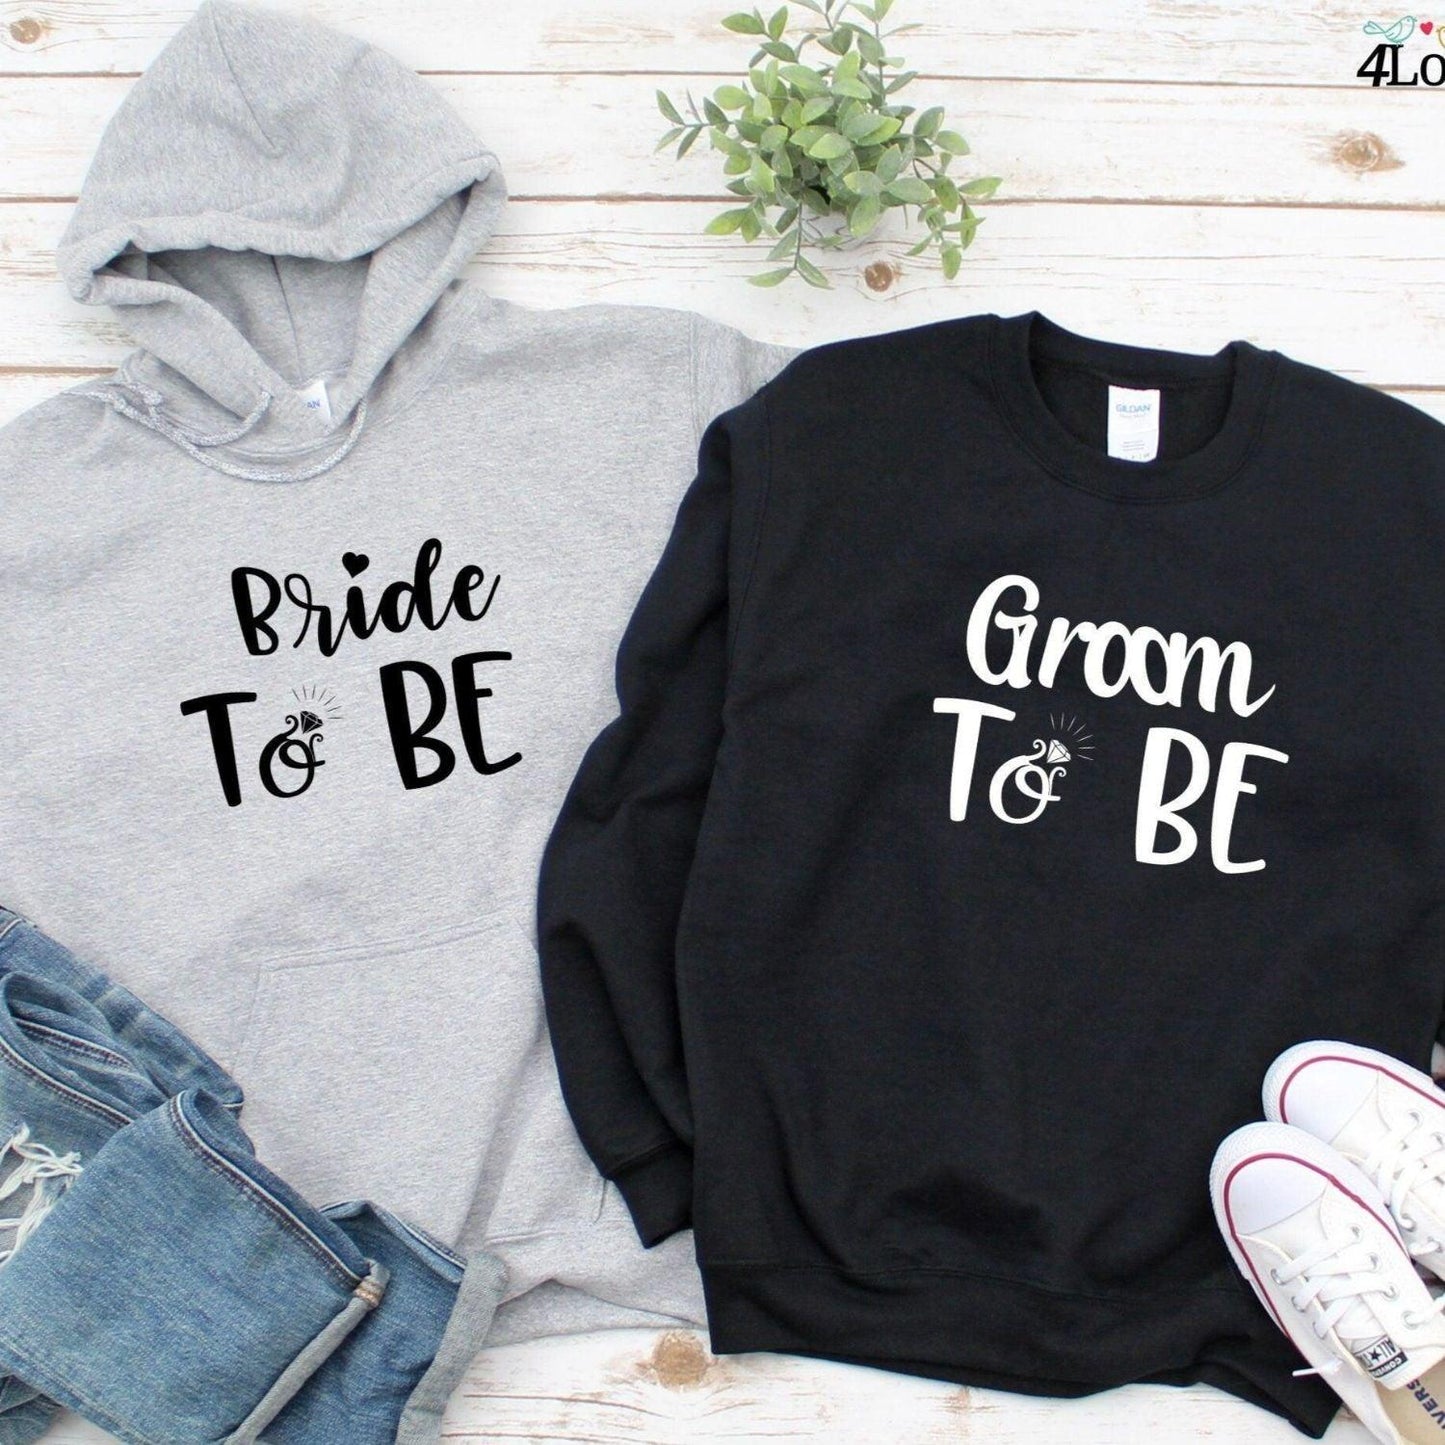 Bride & Groom to Be Matching Outfits: Perfect Wedding Set, Couple Presents, Nuptial Gifts - 4Lovebirds